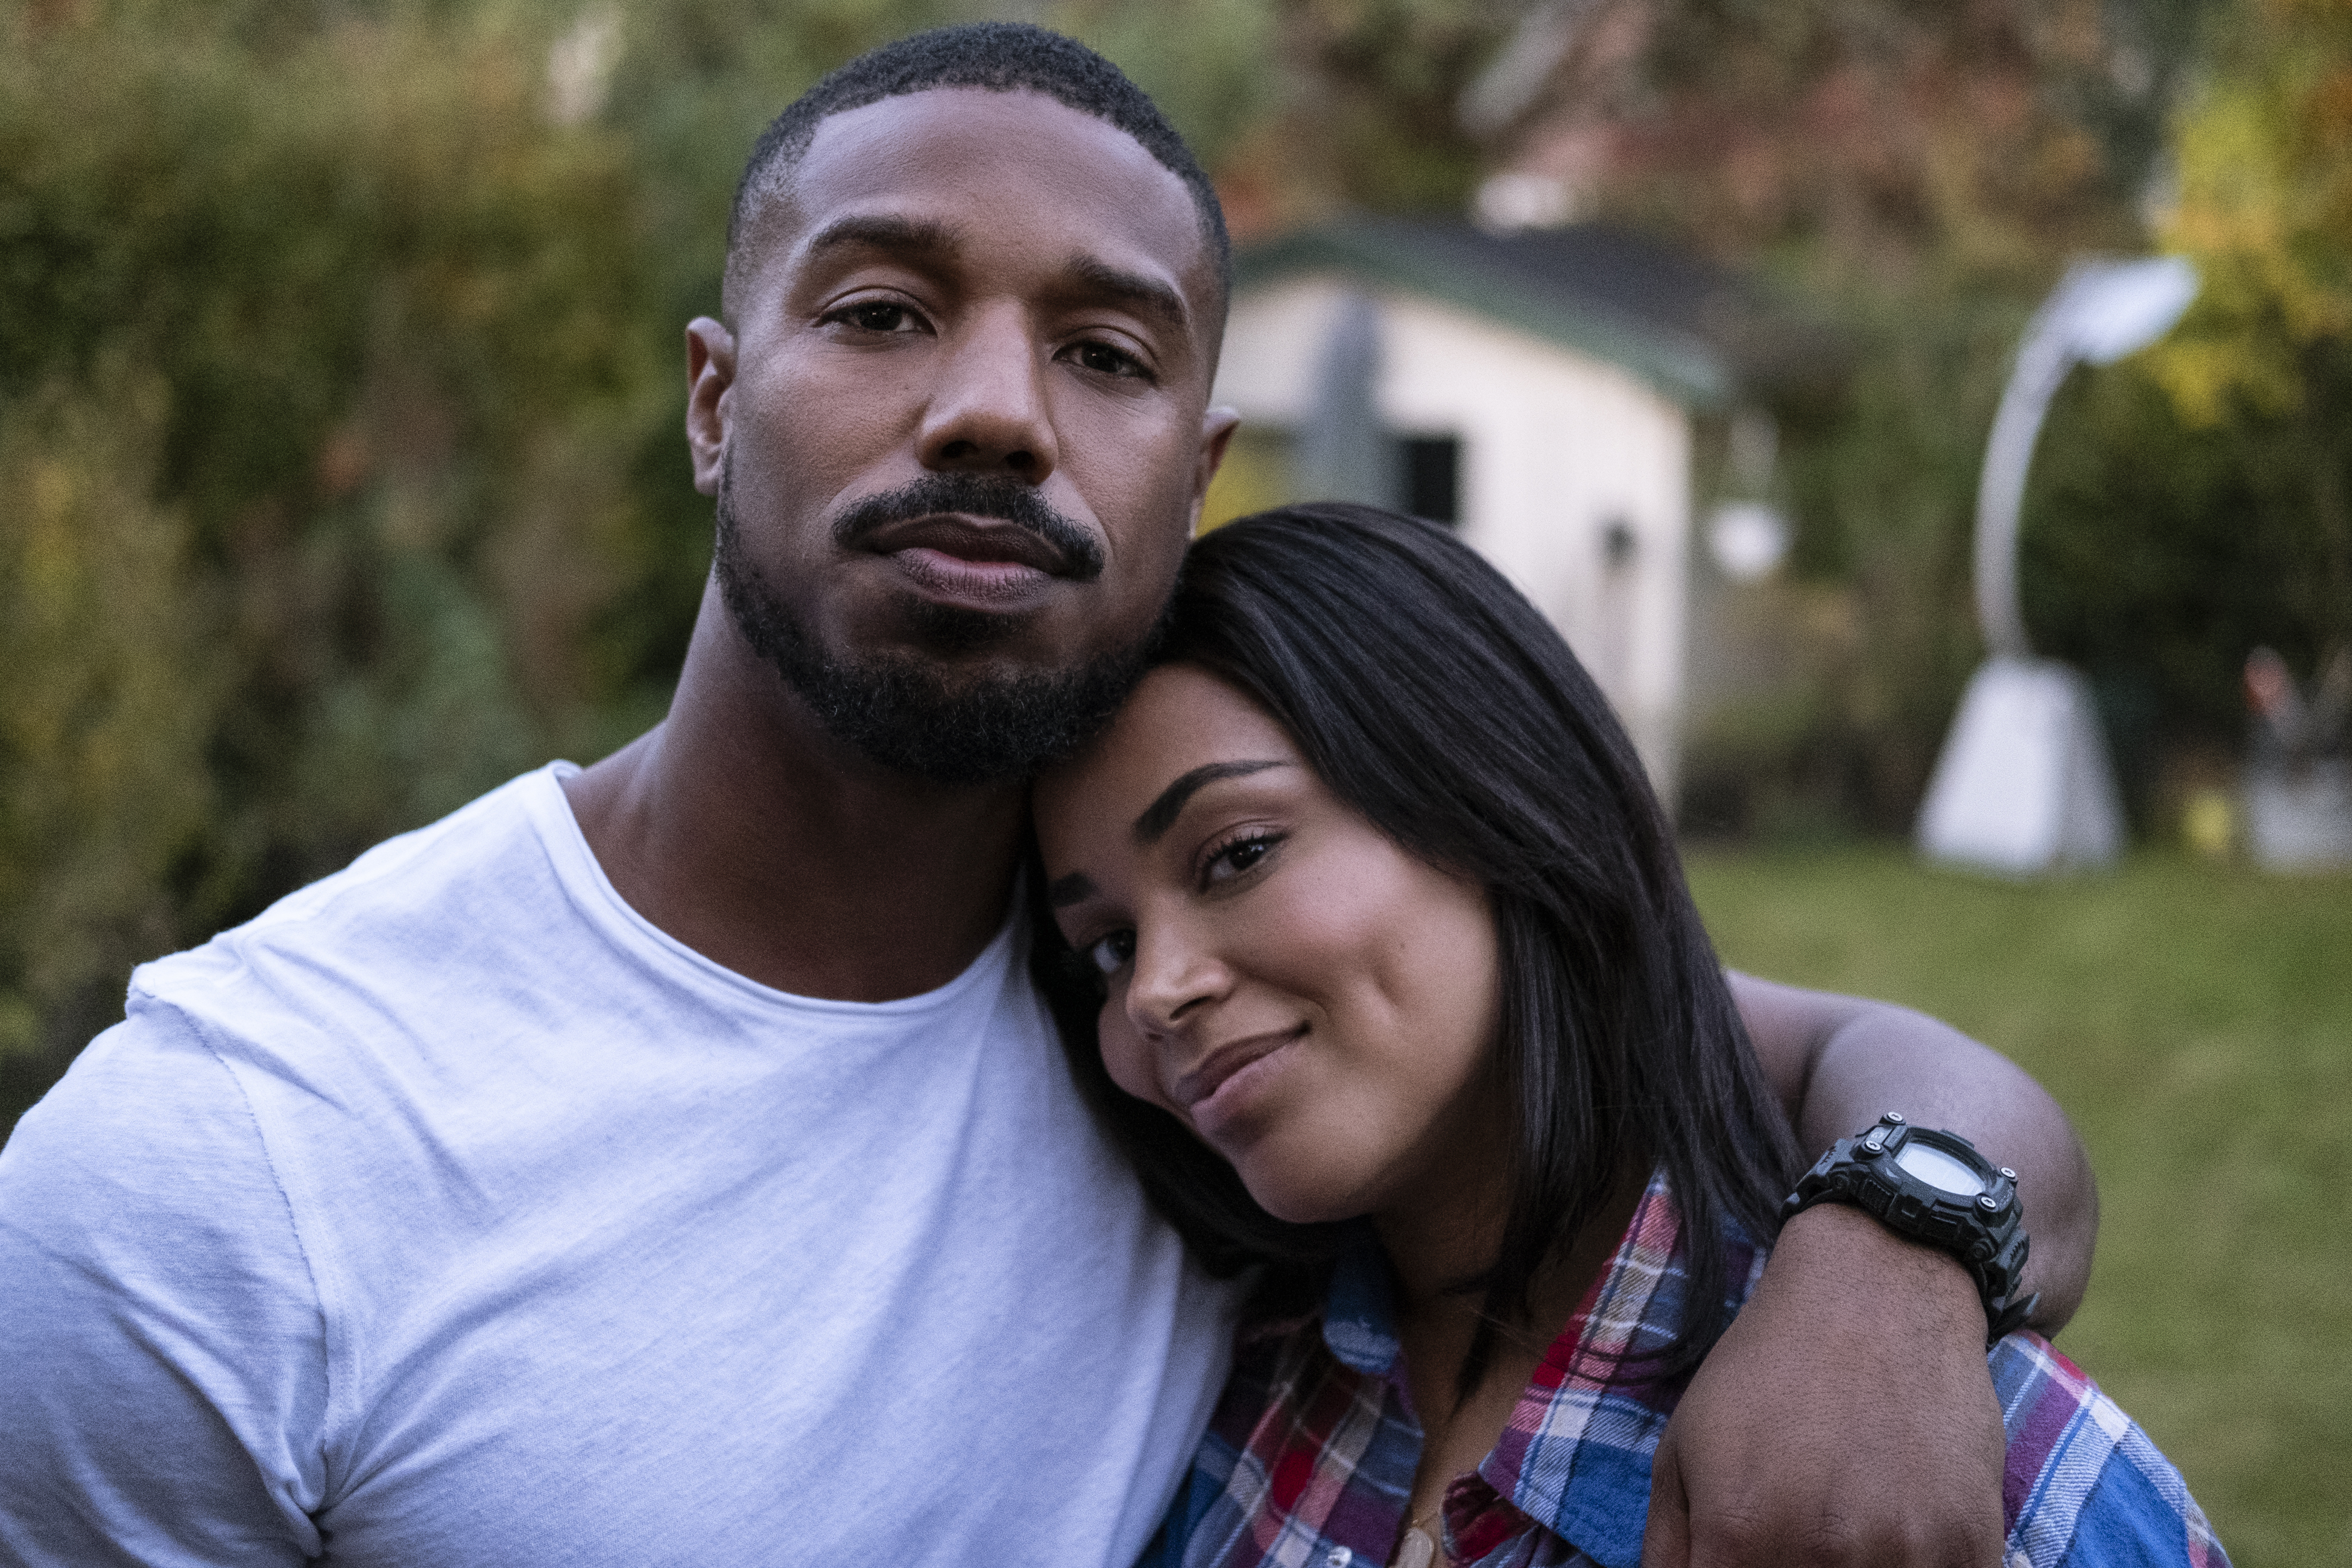 Michael B. Jordan Interview About His New Movie, Without Remorse